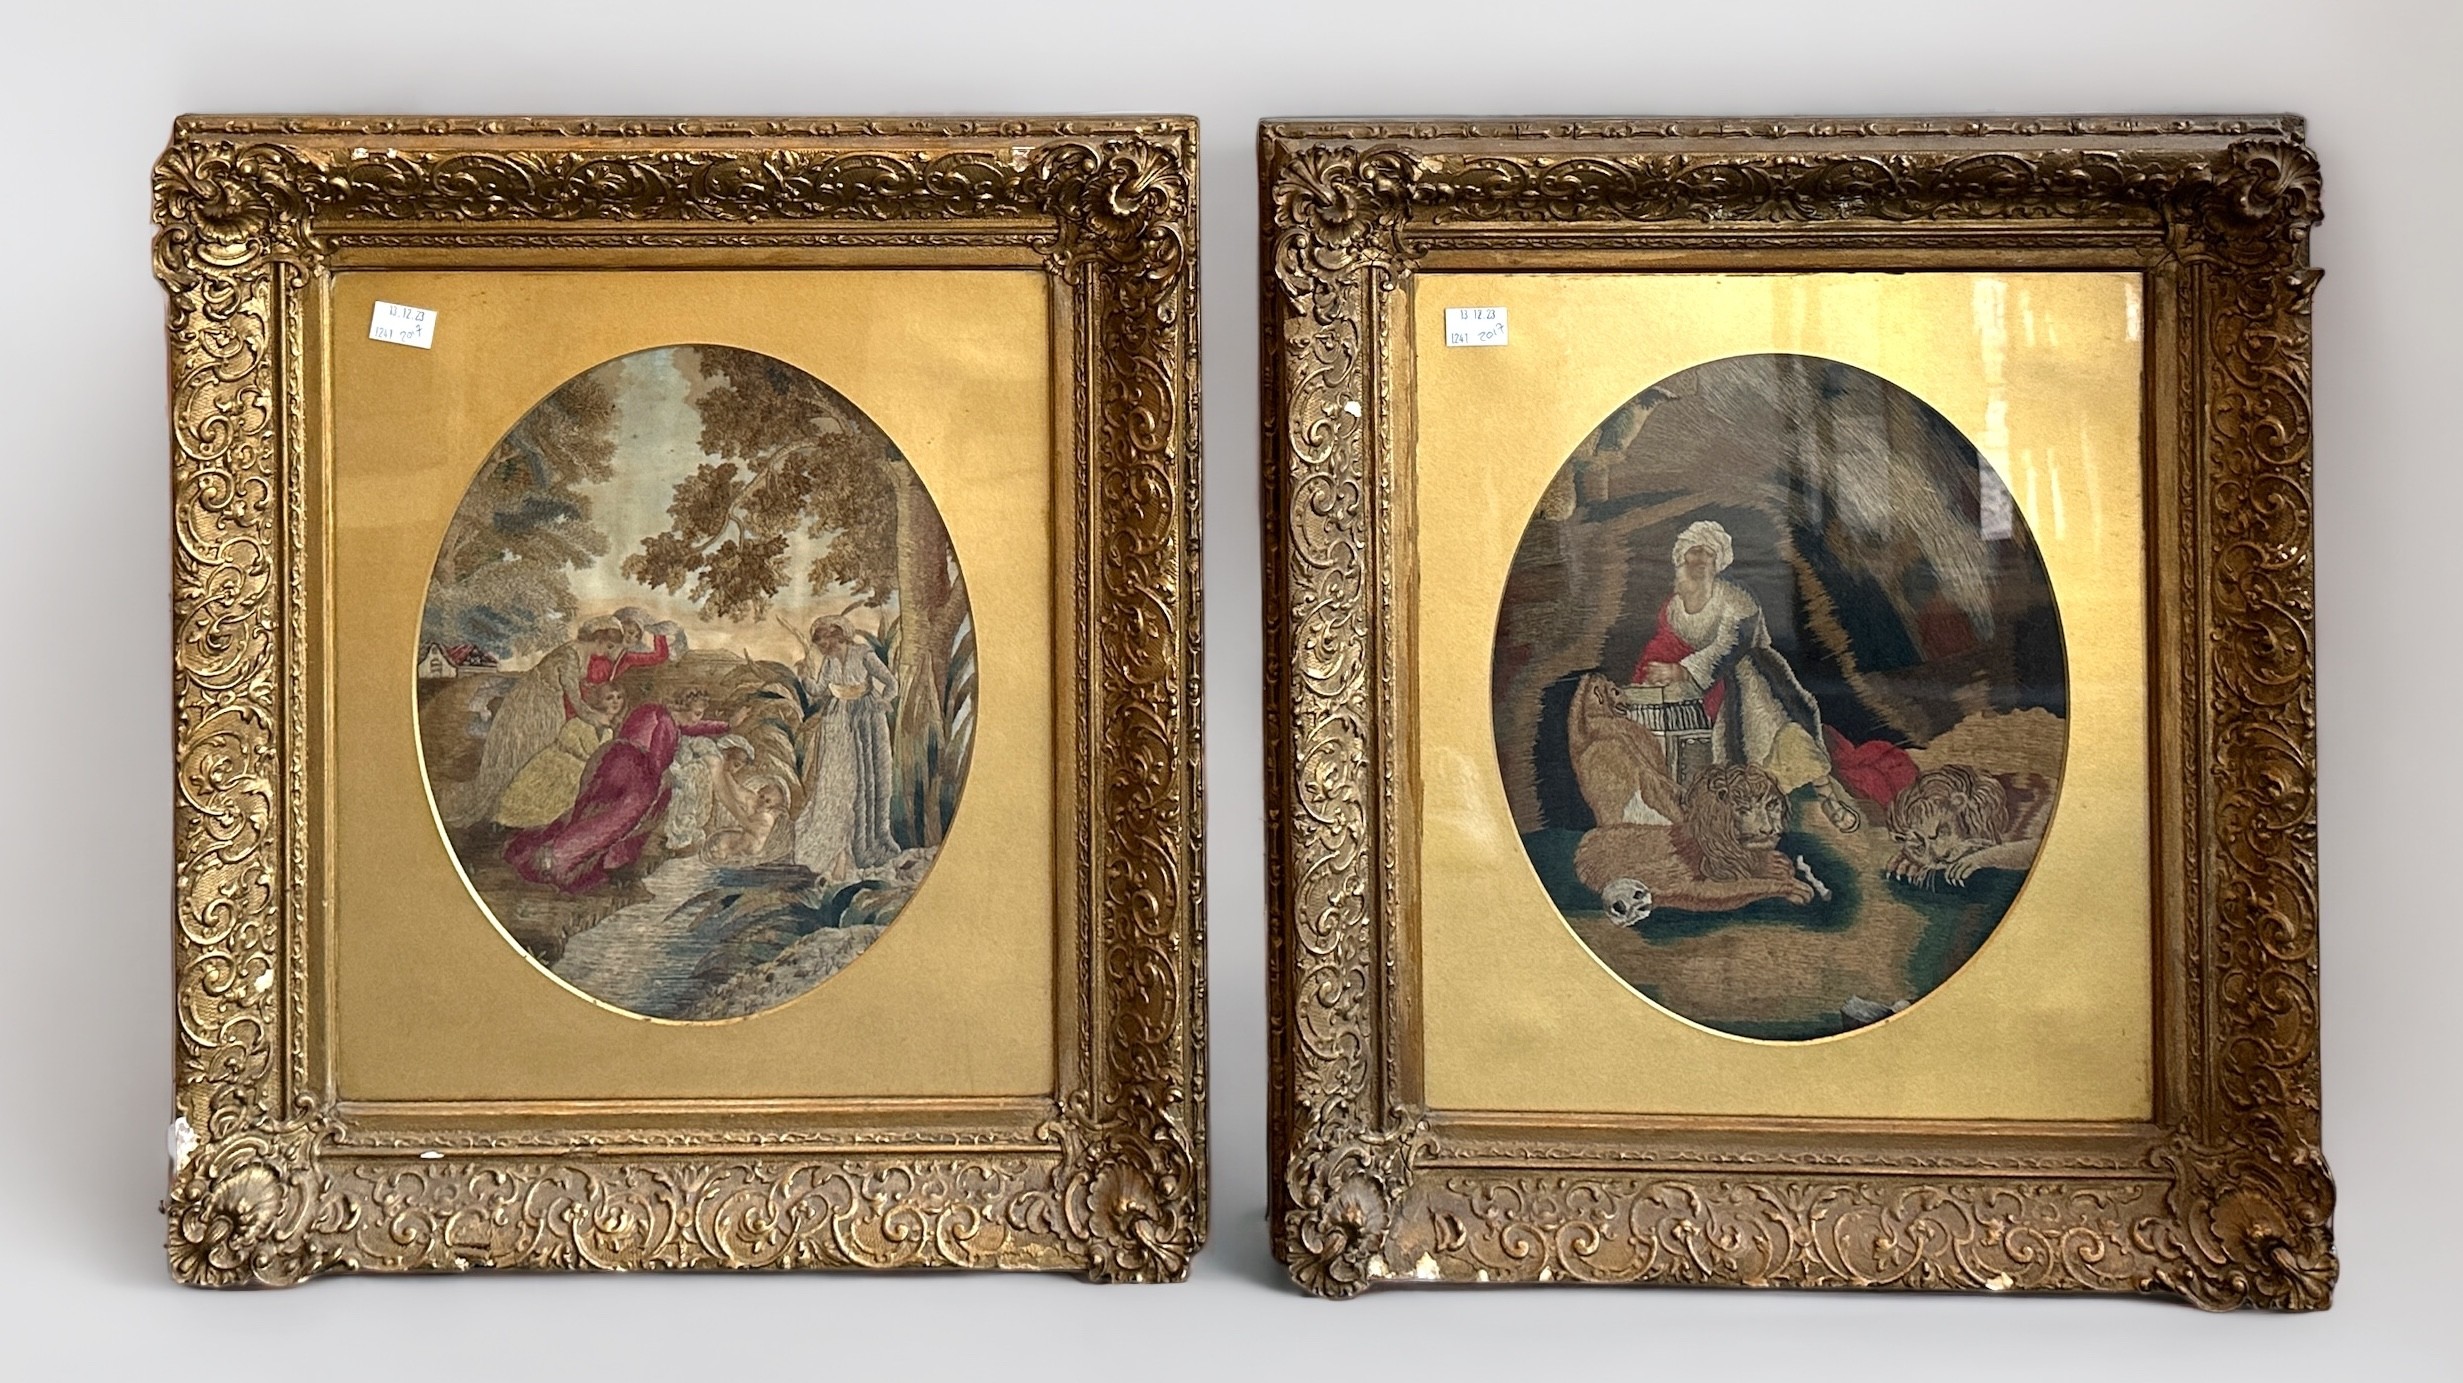 A pair of George III Oval Silkwork Pictures, worked in fine coloured silk threads with stories